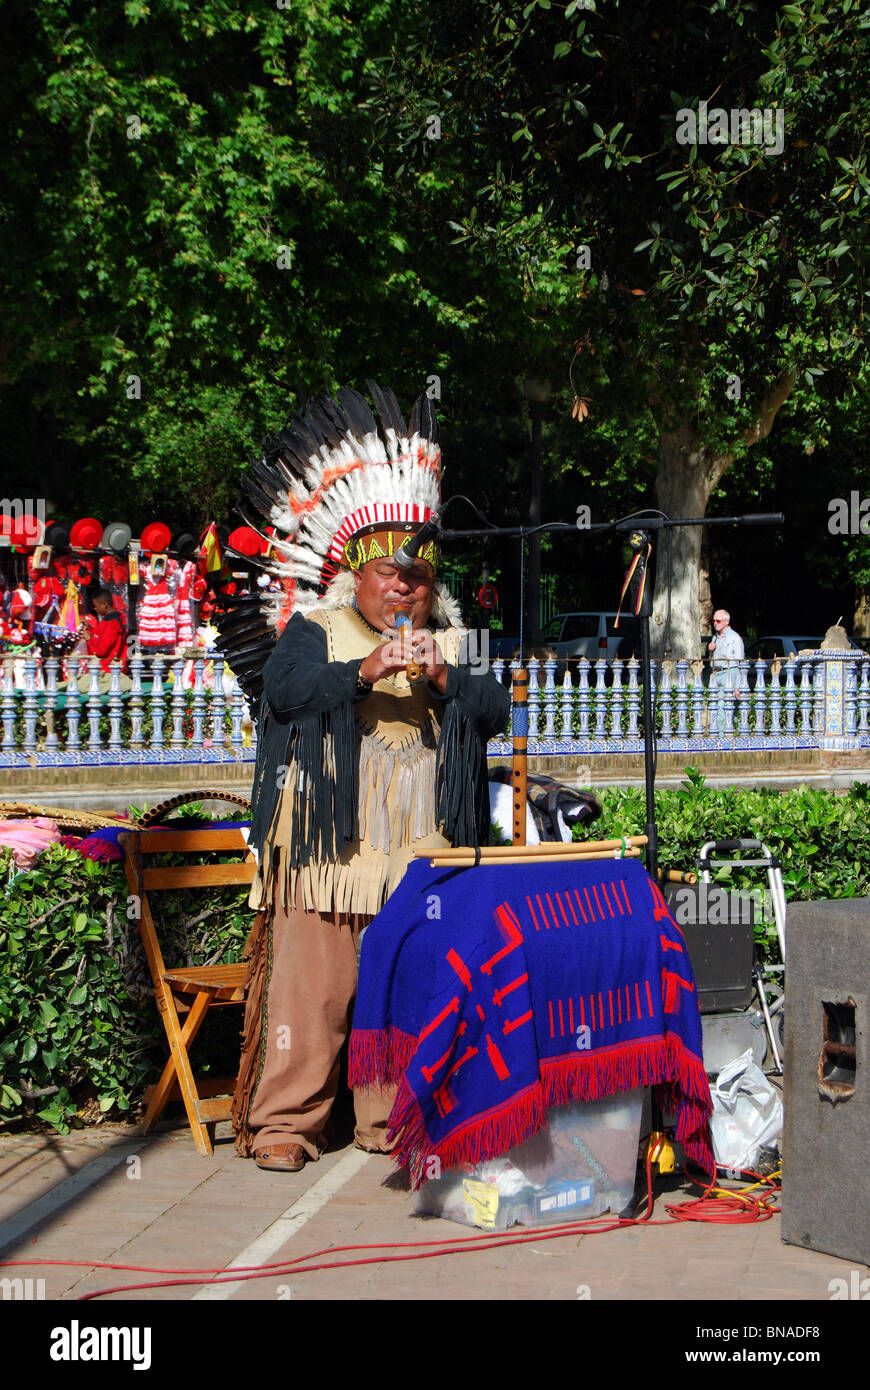 American Indian busker in the Plaza de Espana, Seville, Seville Province, Andalucia, Spain, Western Europe. Stock Photo